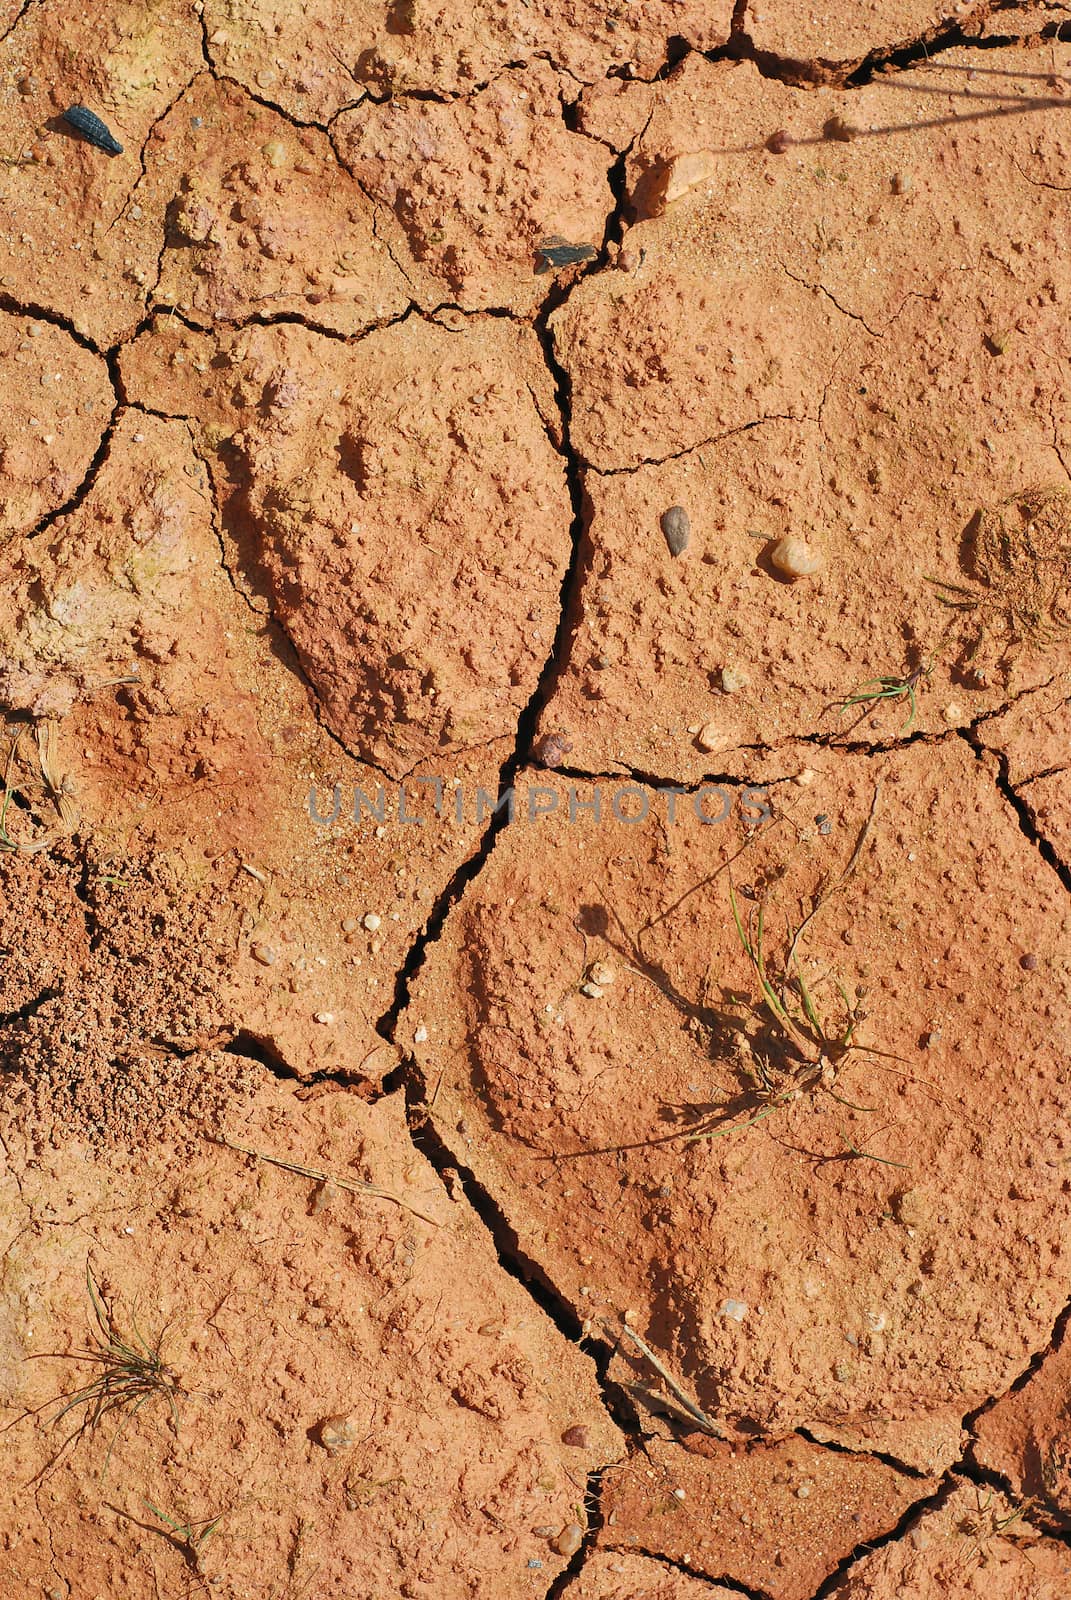 dry soil indicating a severe drought without rain, remnants of dried grass